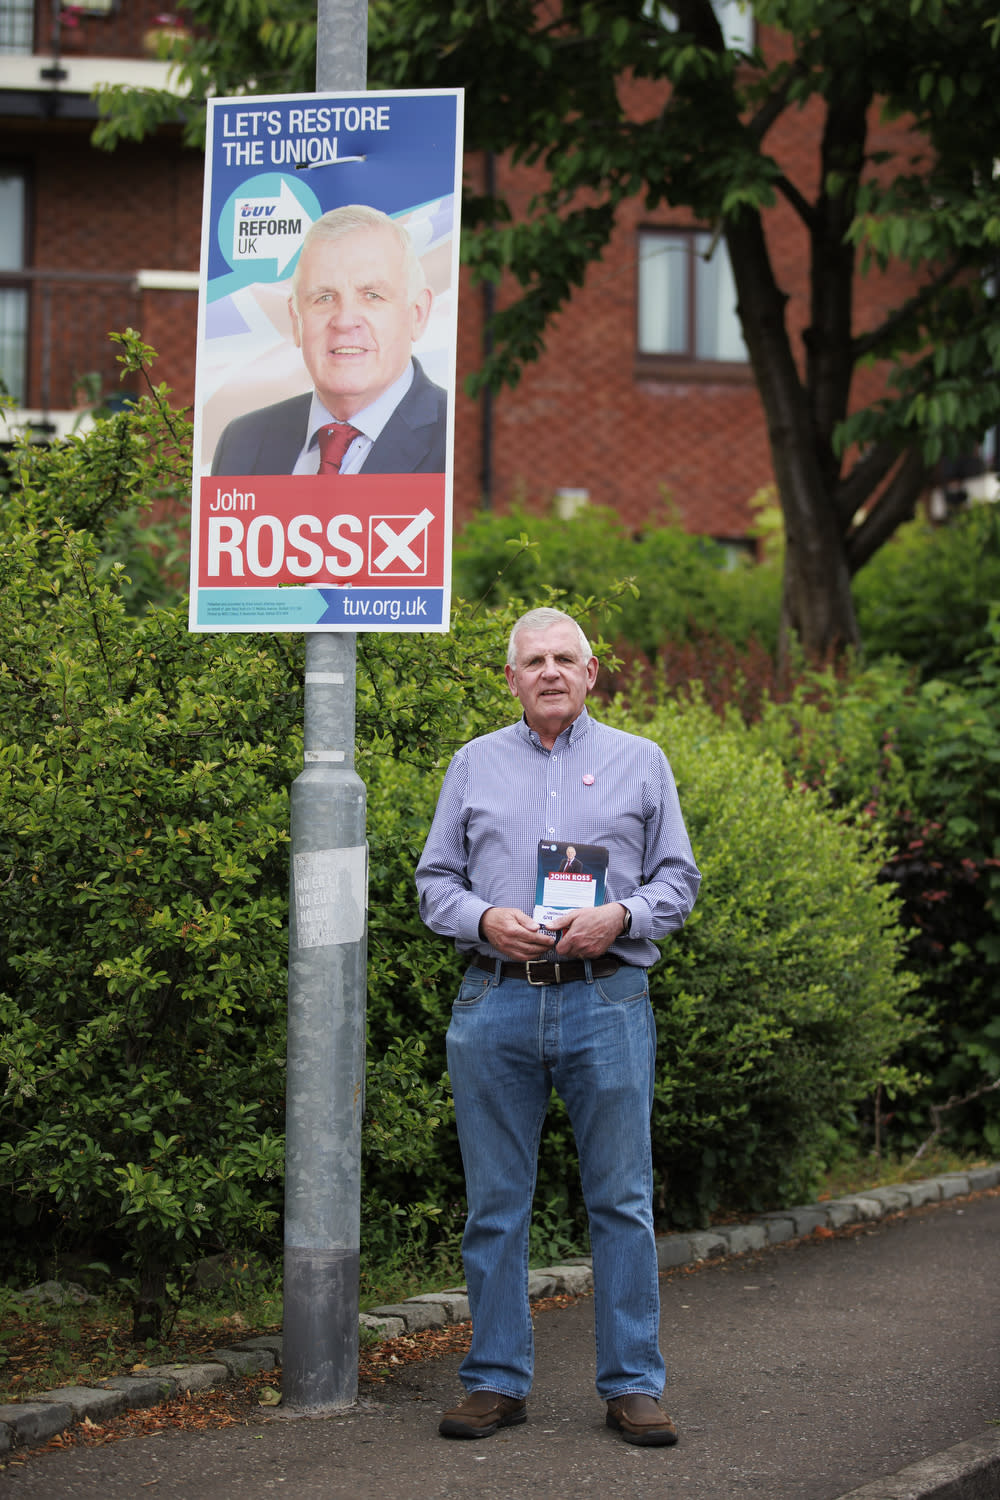 John Ross is running for the TUV and hoping to attract votes from disaffected DUP voters (Liam McBurney/PA)